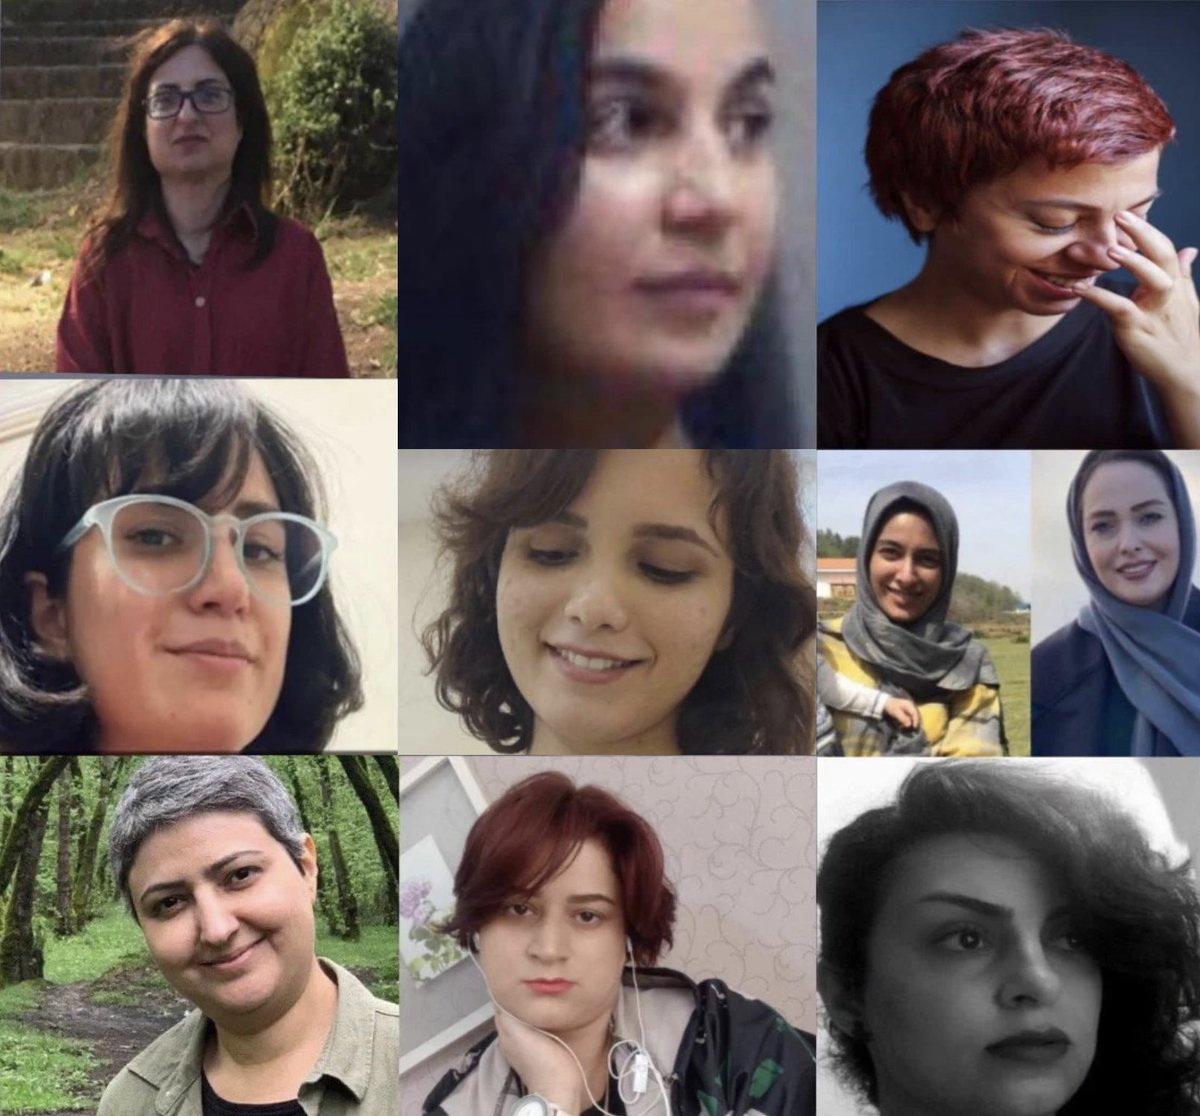 Deeply concerned about the arrest of women's rights defenders in #Iran, with their families unaware of their location and accusations. Iranian authorities must release them immediately and halt the persecution of women's rights advocates. @PMIRAN_GENEVA @BBCFarnaz @Sima_Sabet